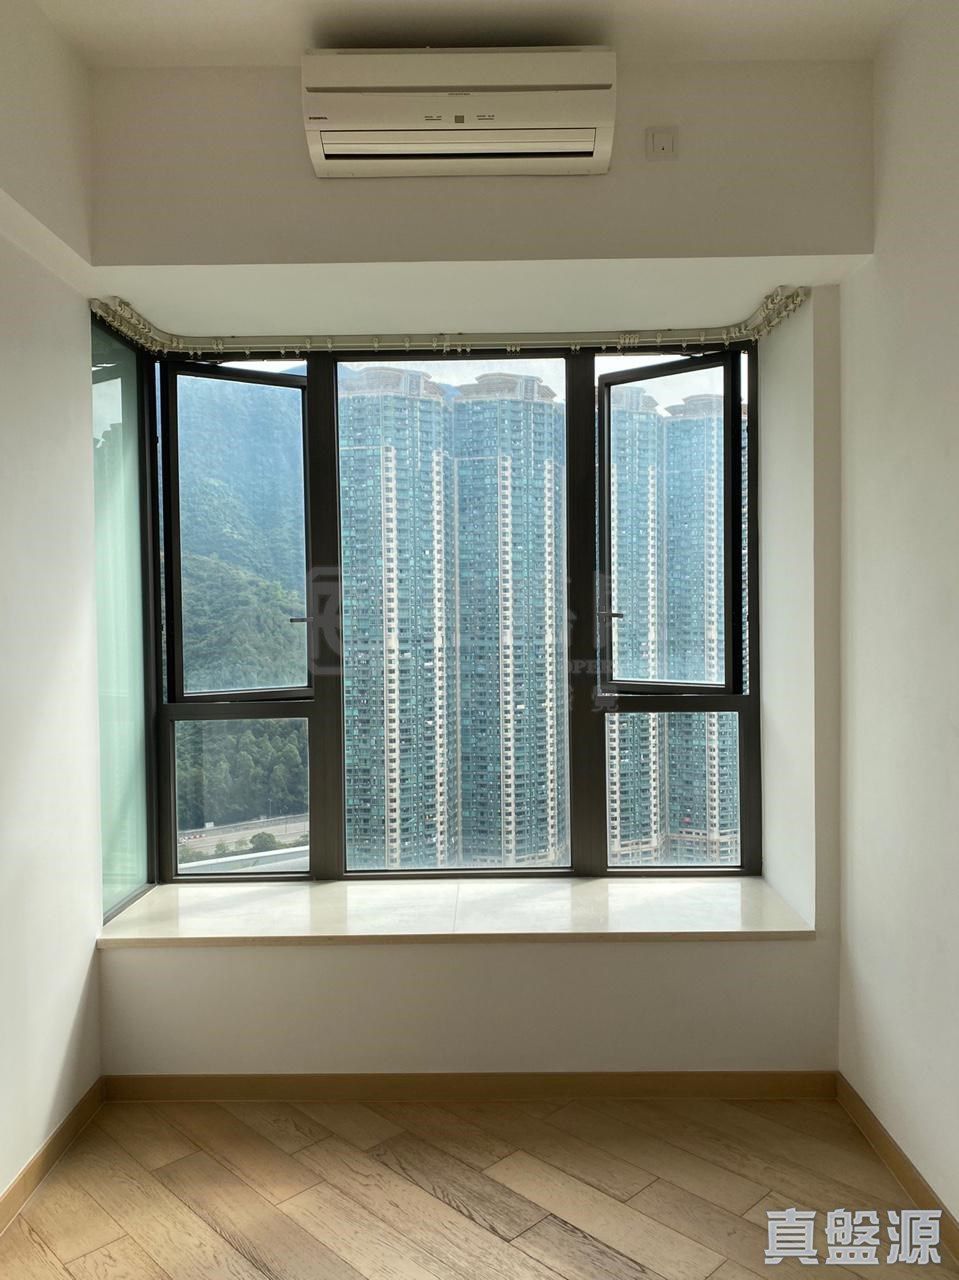  The Visionary 一房 開揚山景放租 The Visionary 1 bedroom flat for rent